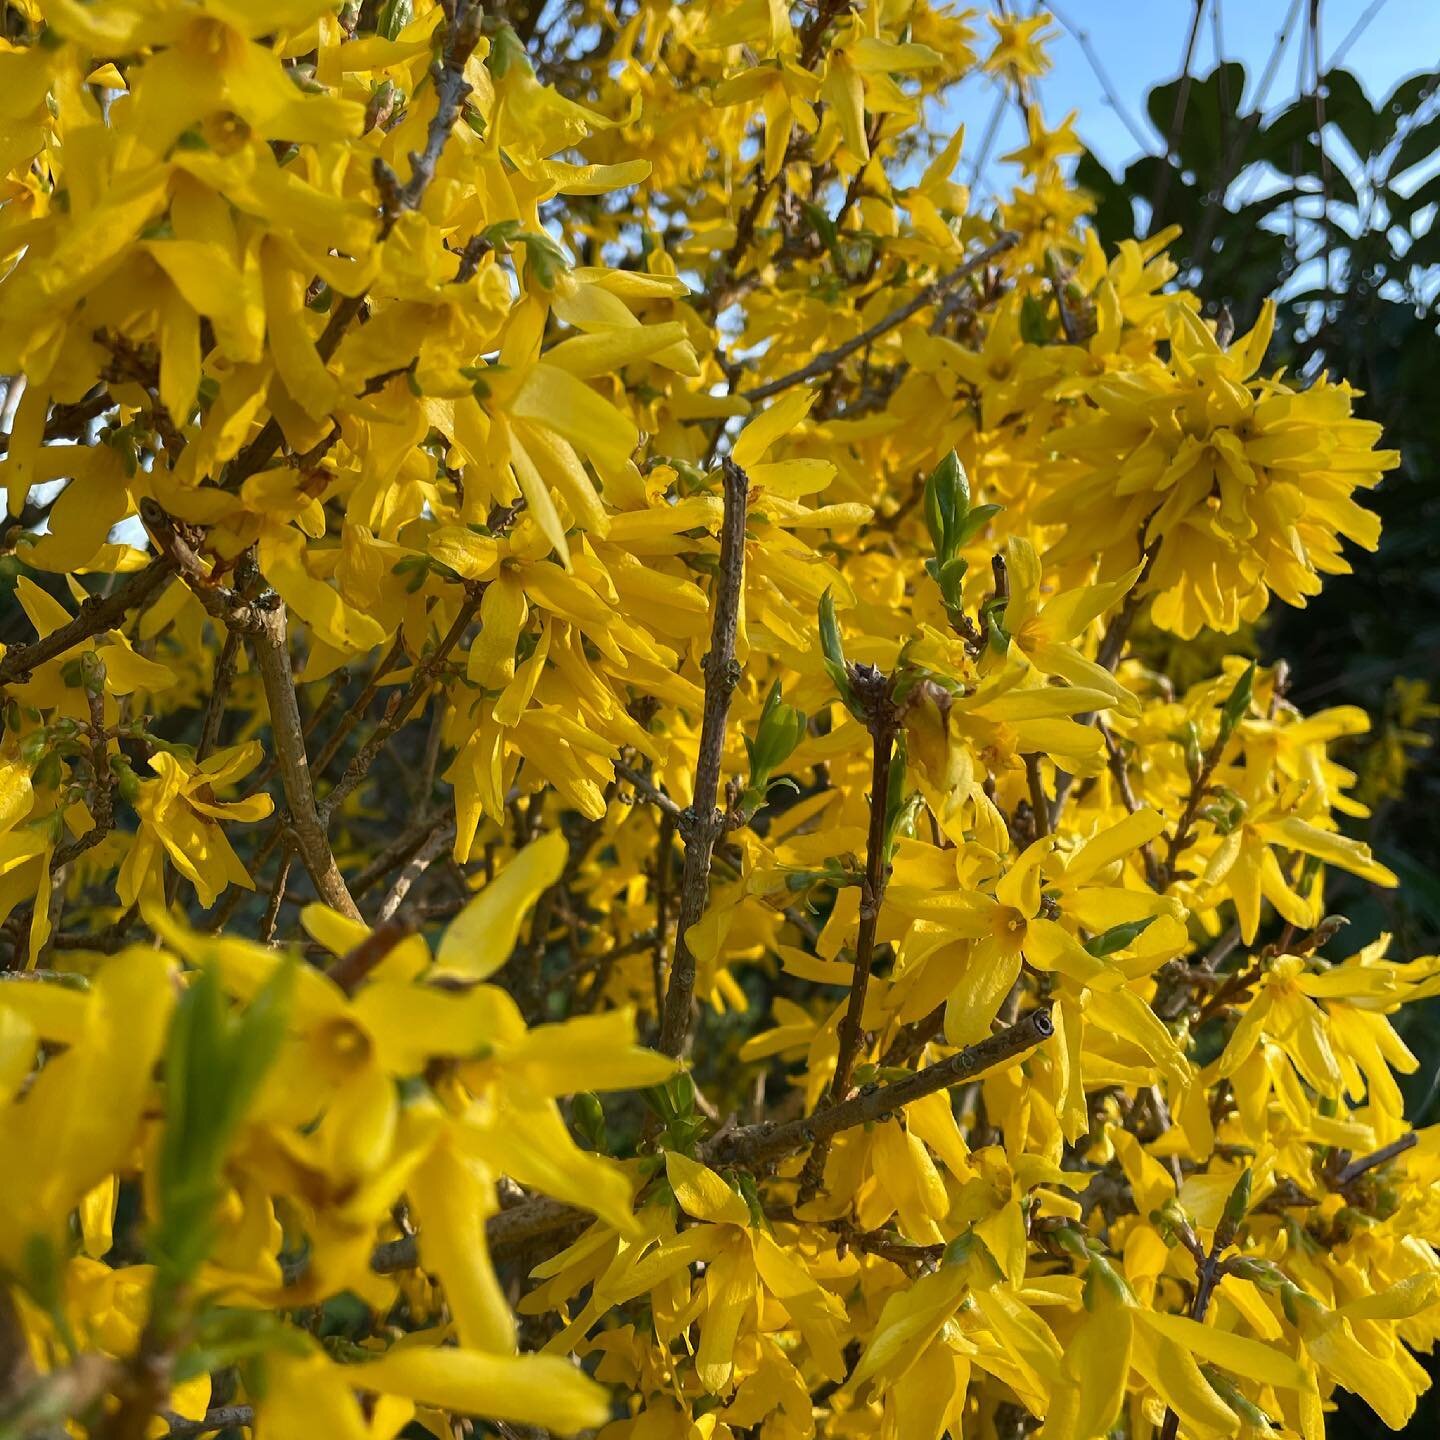 This forsythia is really bringing all the life to the garden. Its so bright and almost looks like feathers from afar, it glows even on the darkest days but is looking particularly glorious in the sunshine today. 

What&rsquo;s exciting is that I can 